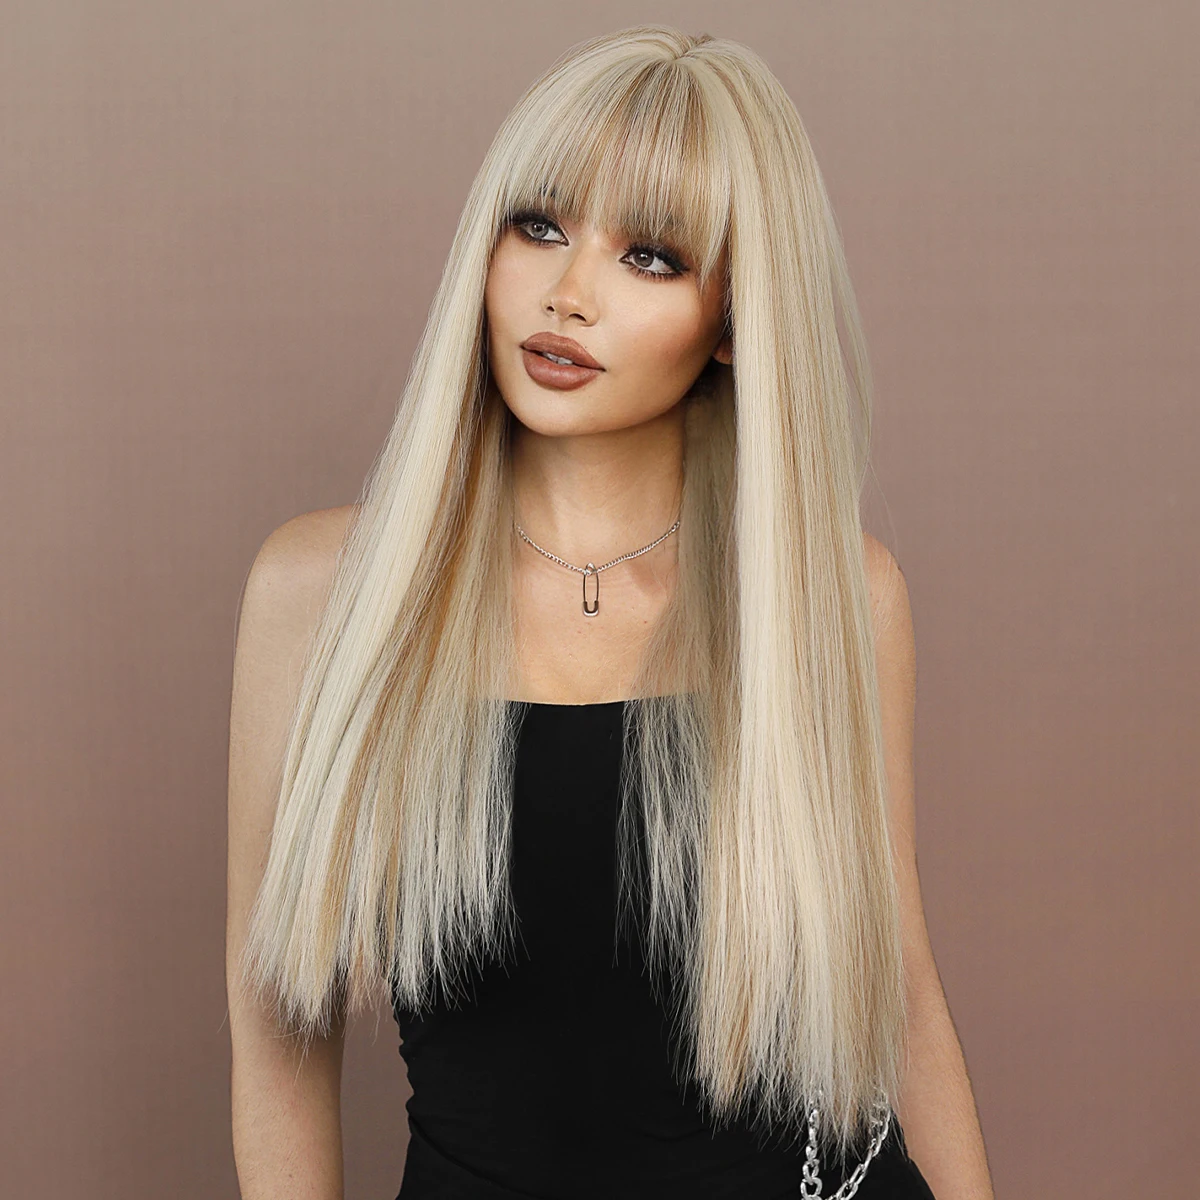 7JHH WIGS Long Straight Brown Highlight Blonde Wigs for Women High Density Heat Resistant Synthetic Hair Wigs with Neat Bangs sylvia long wavy brown wig synthetic full machine made wig with bangs brown wigs for women ombre blonde none lace wig 22 inches